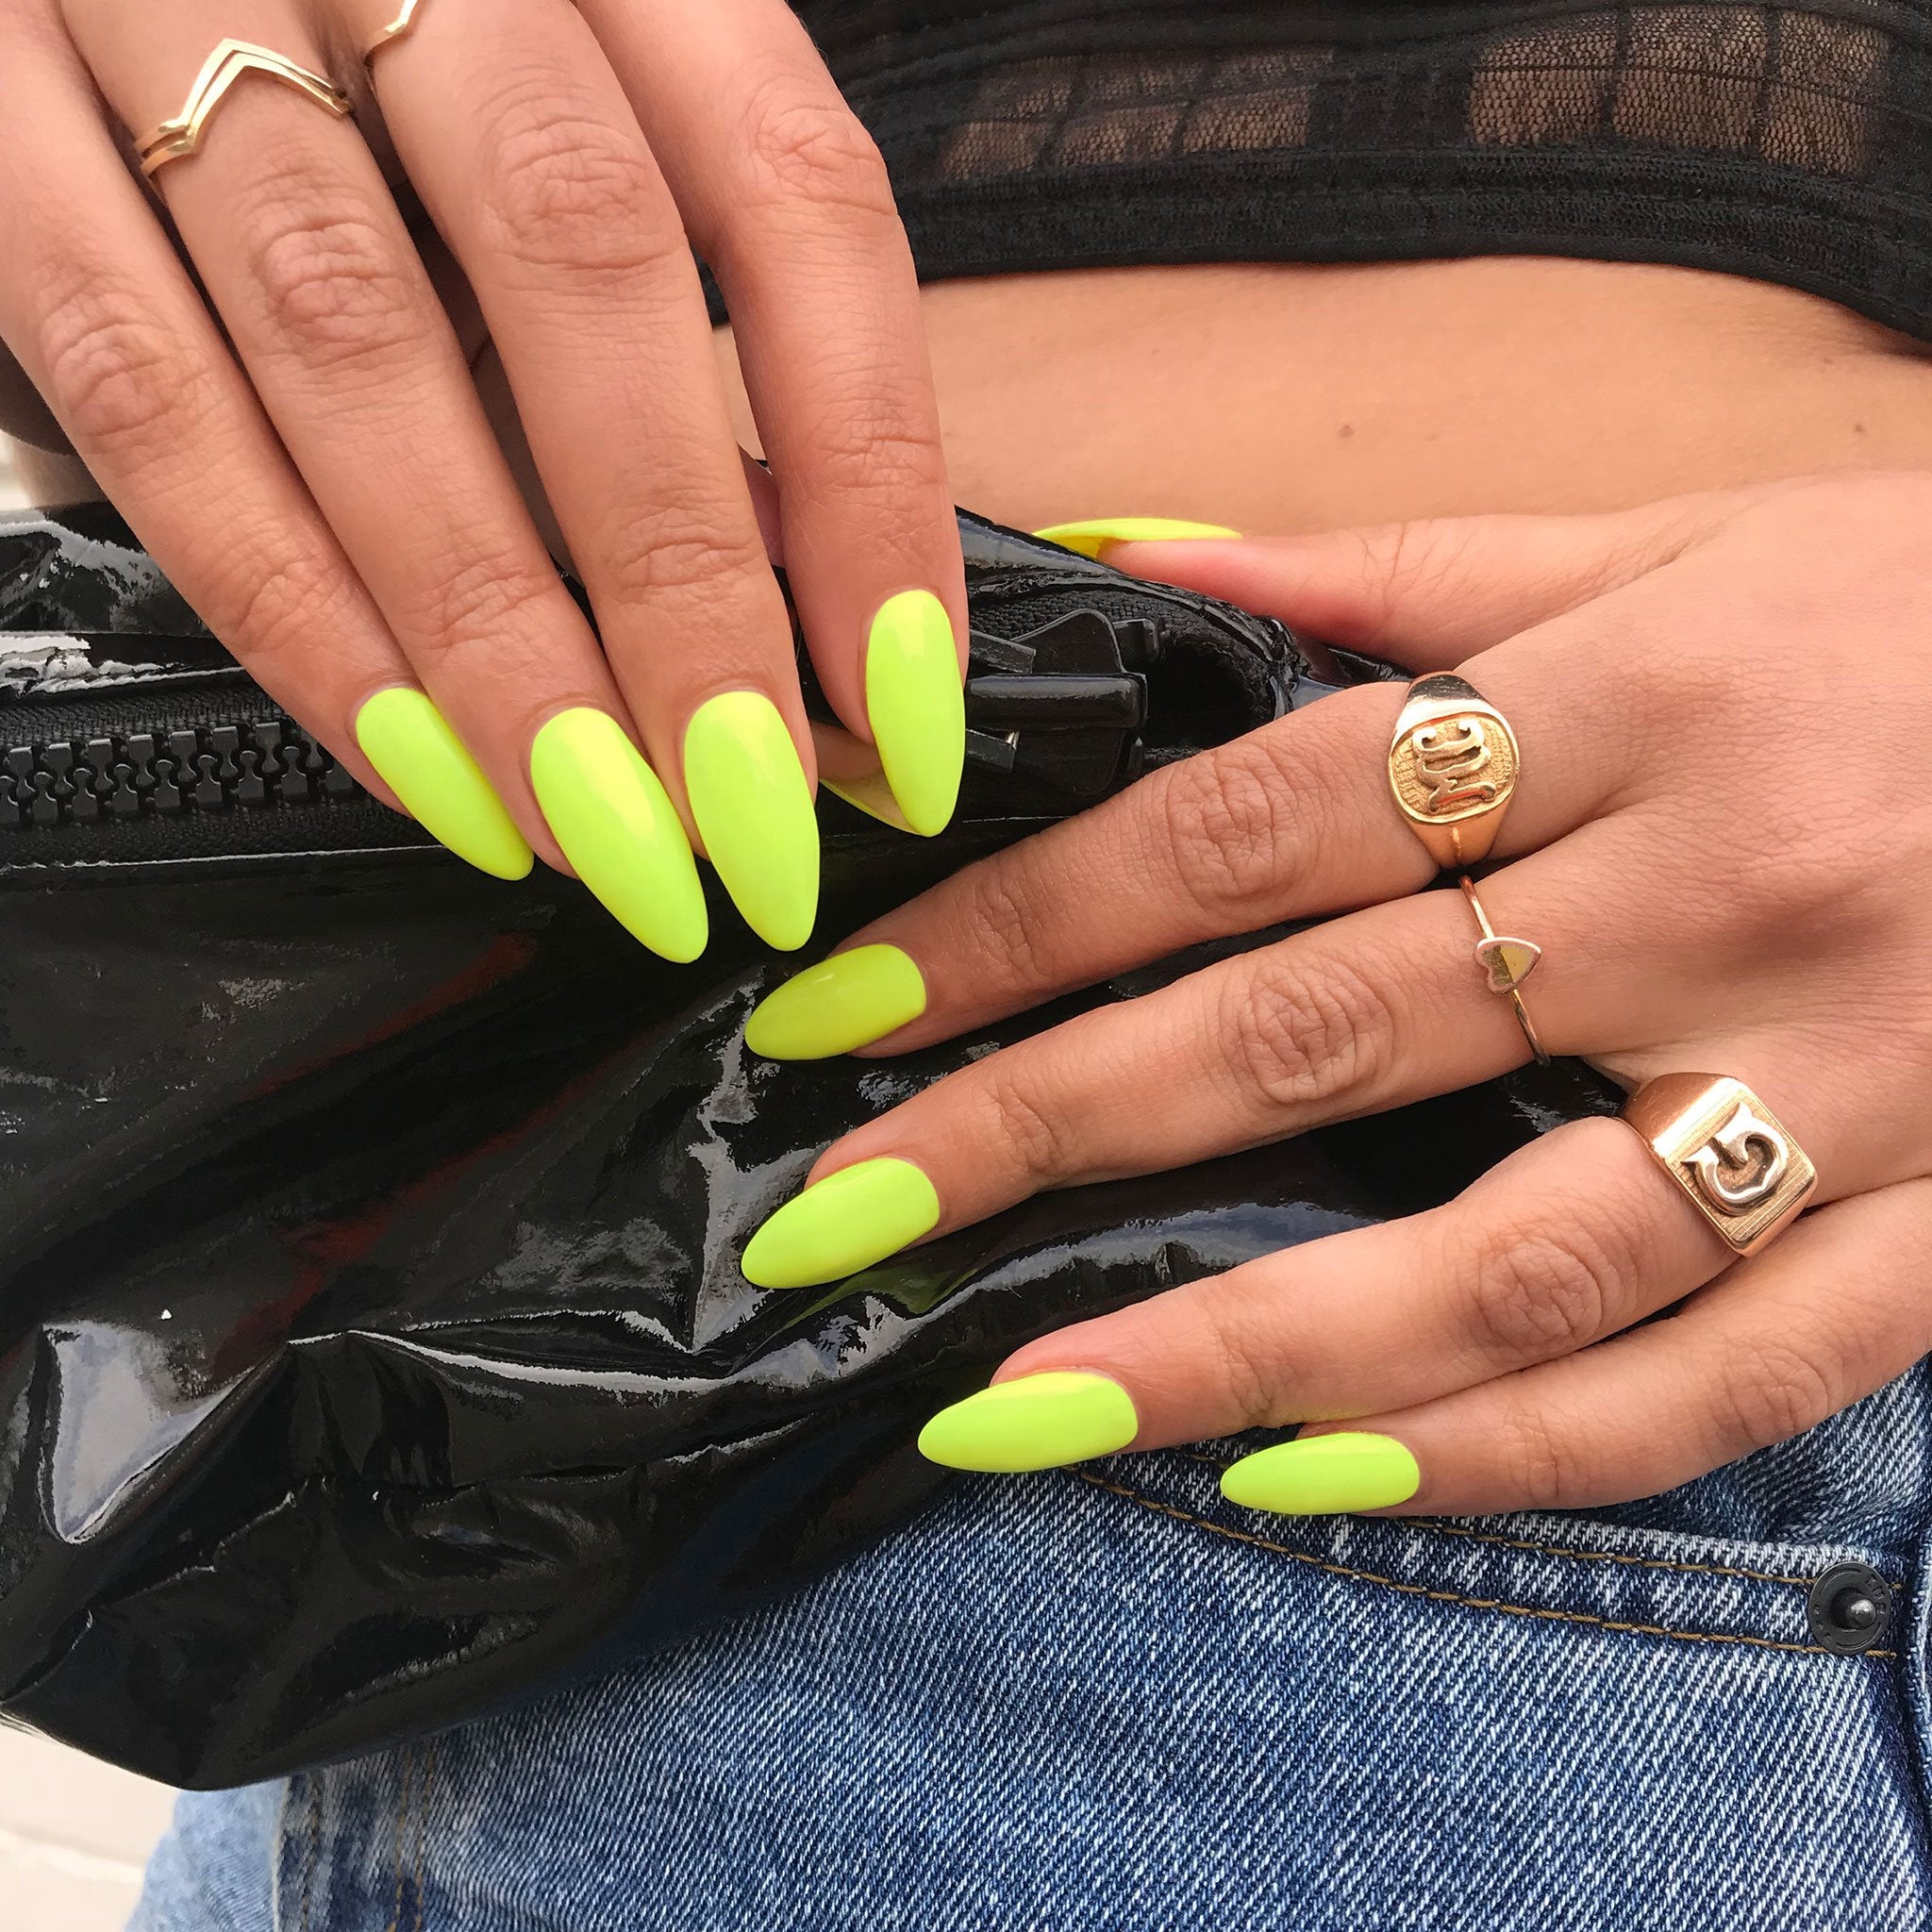 3 Alternatives to Acrylic Nails That You Need to Know About - Brit + Co